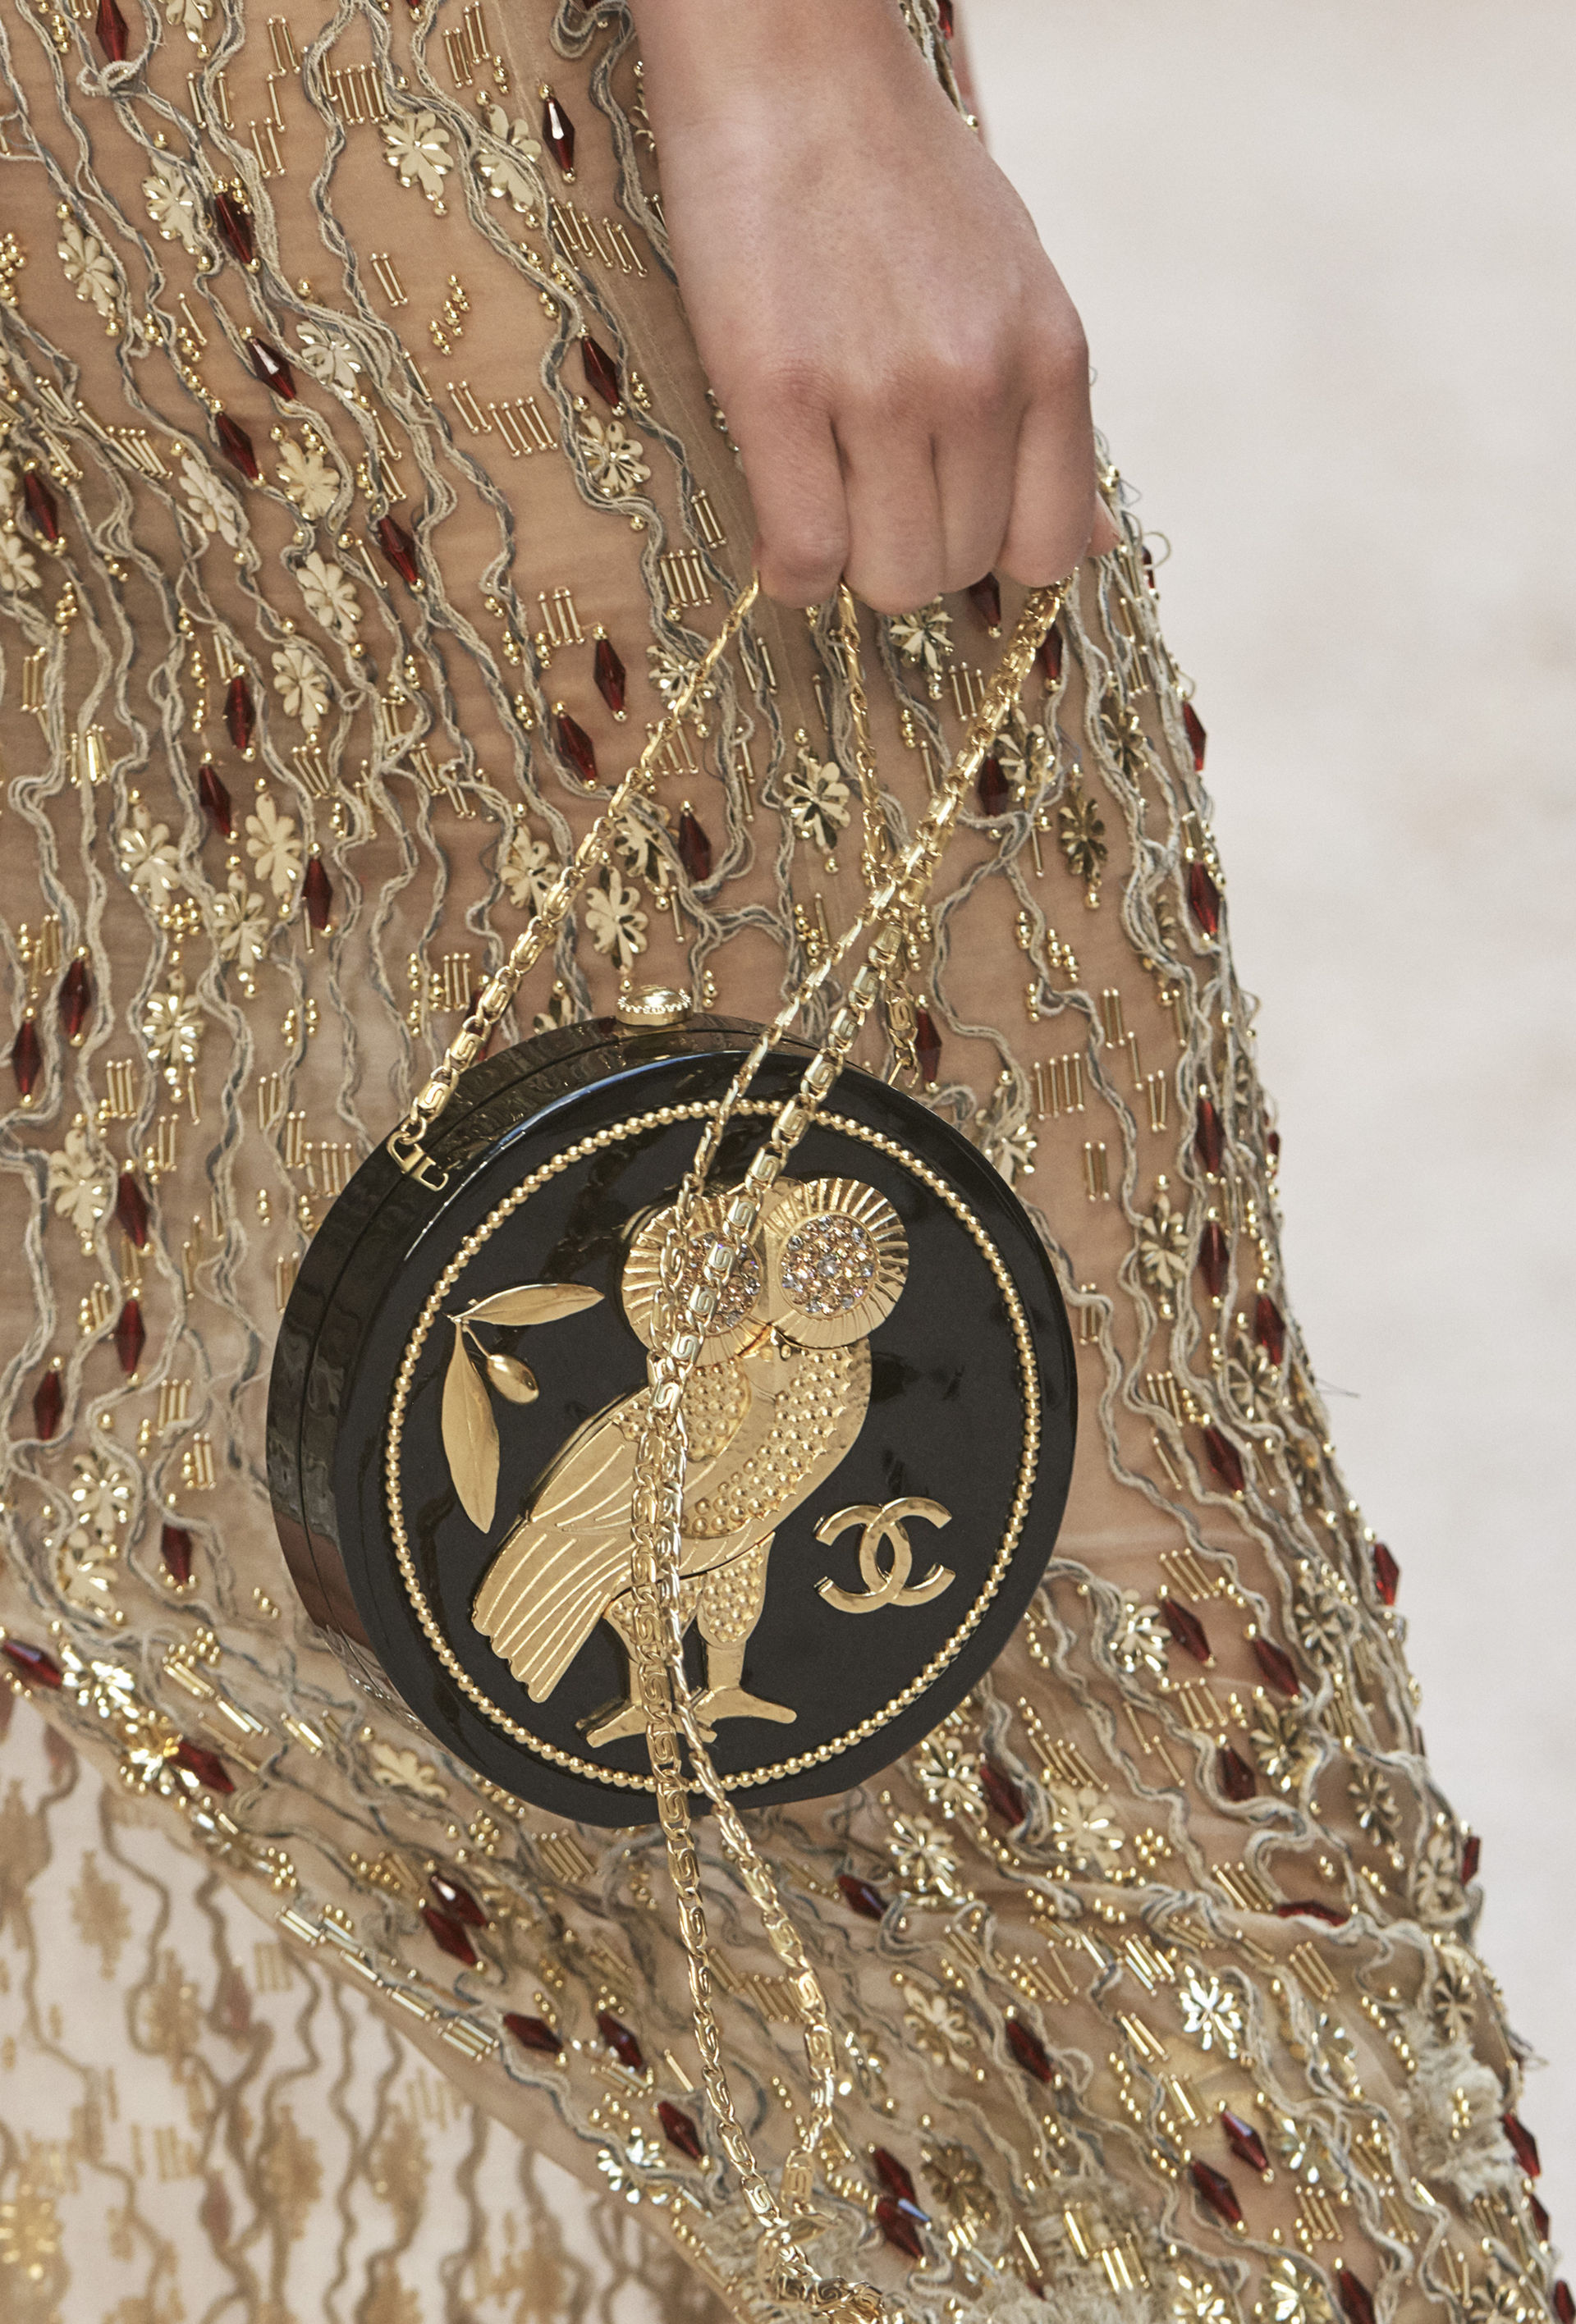 The Cult Of Chanel Cruise